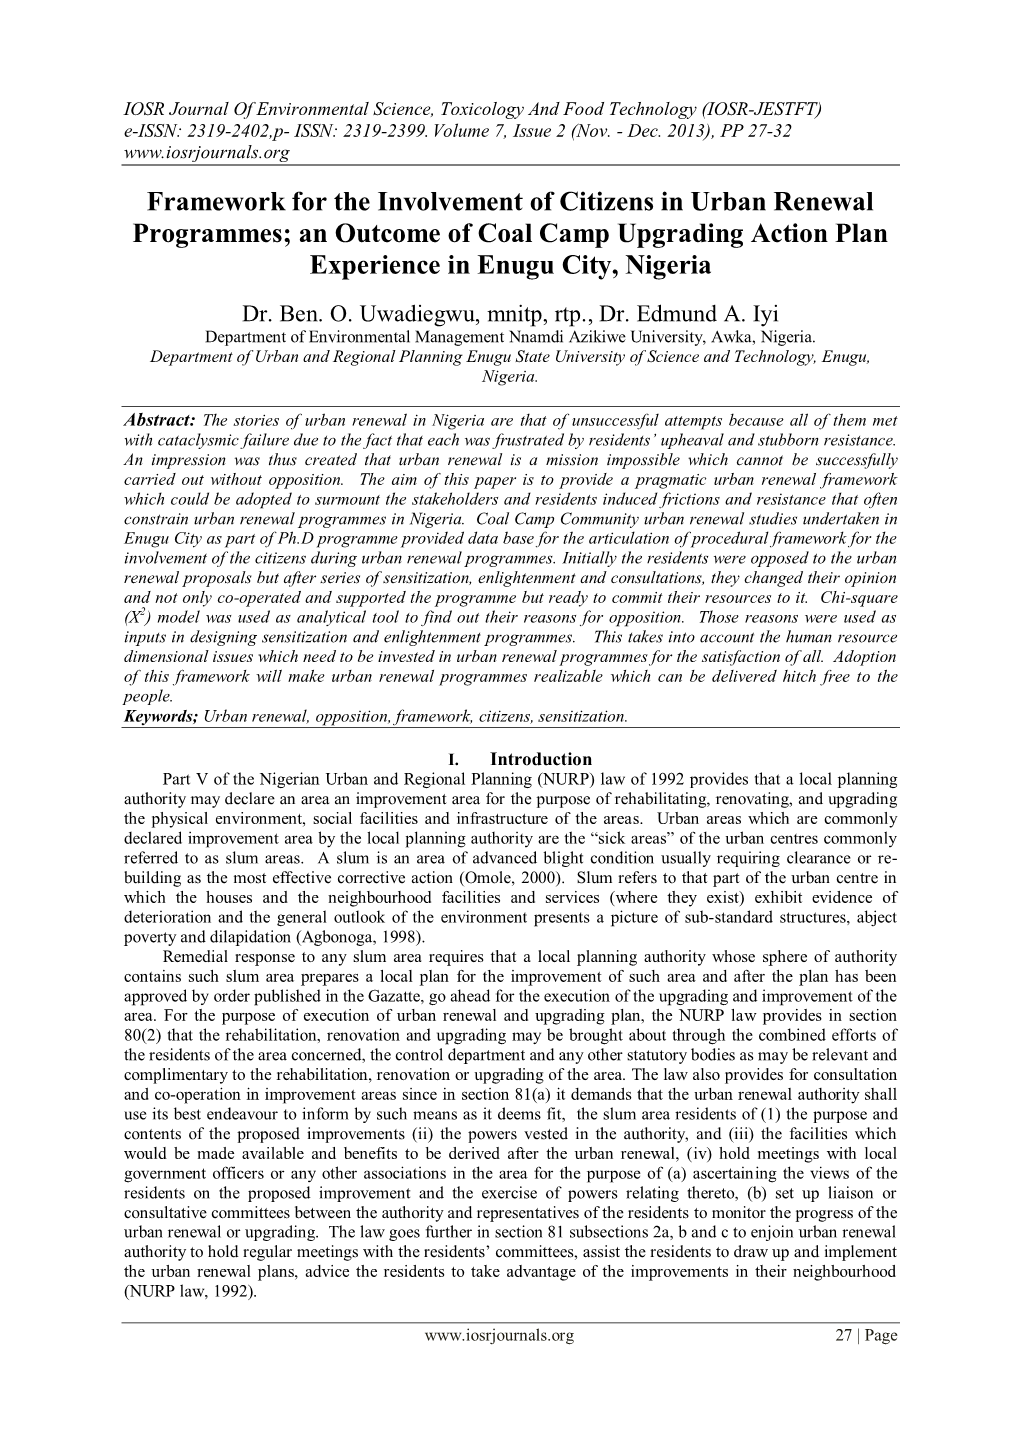 Framework for the Involvement of Citizens in Urban Renewal Programmes; an Outcome of Coal Camp Upgrading Action Plan Experience in Enugu City, Nigeria